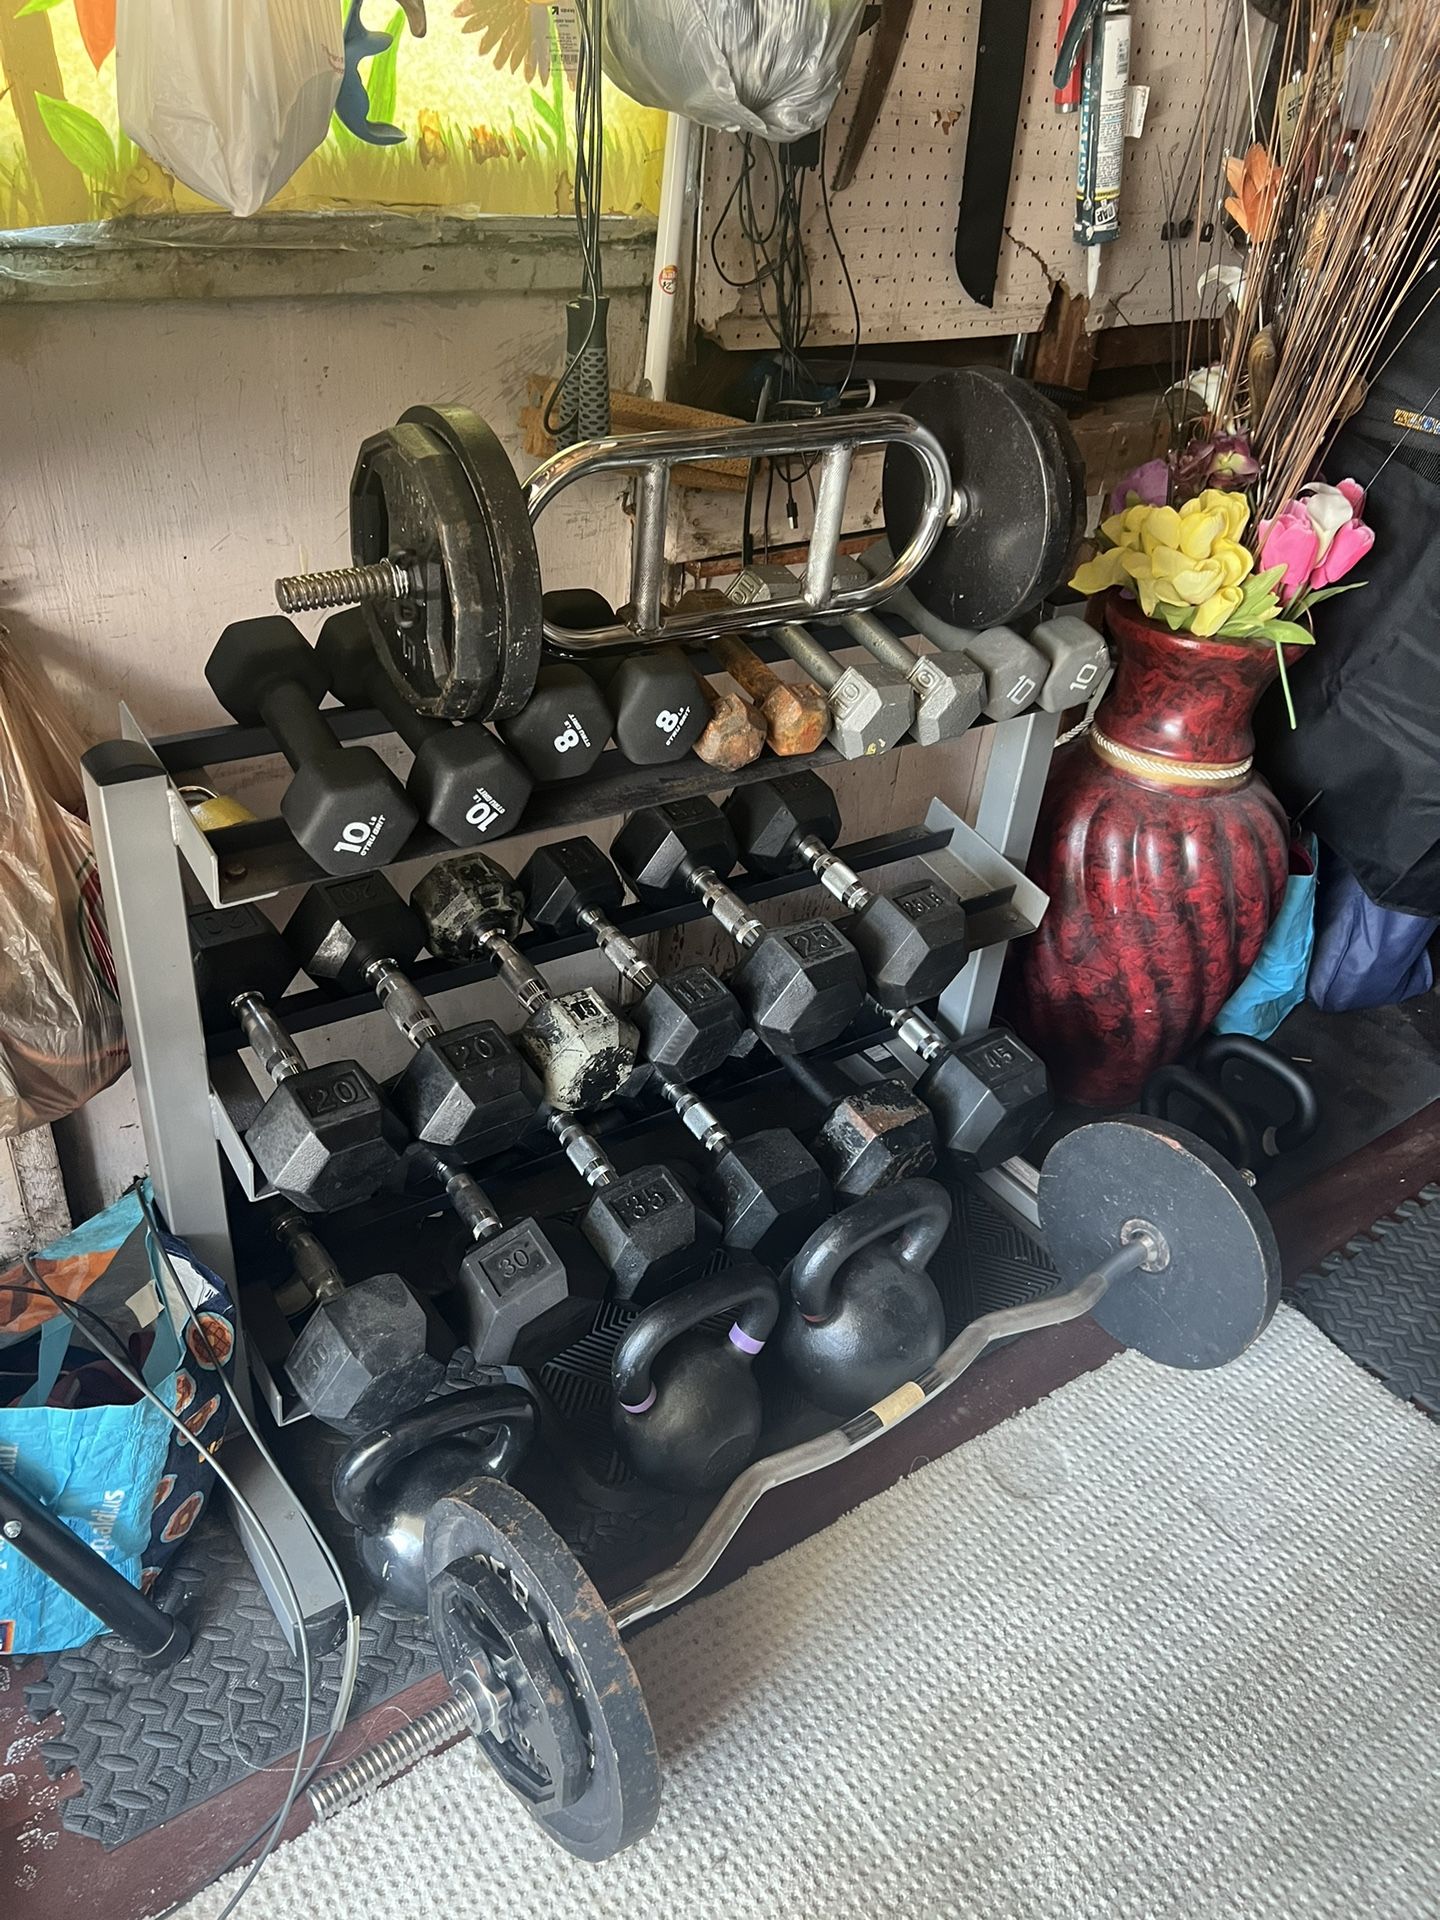 Rack & dumbbells Weight 5.10 .15.20.25.30 35 Only 1 ,50 Pounds &1. 45 Pons 8 Pons & 